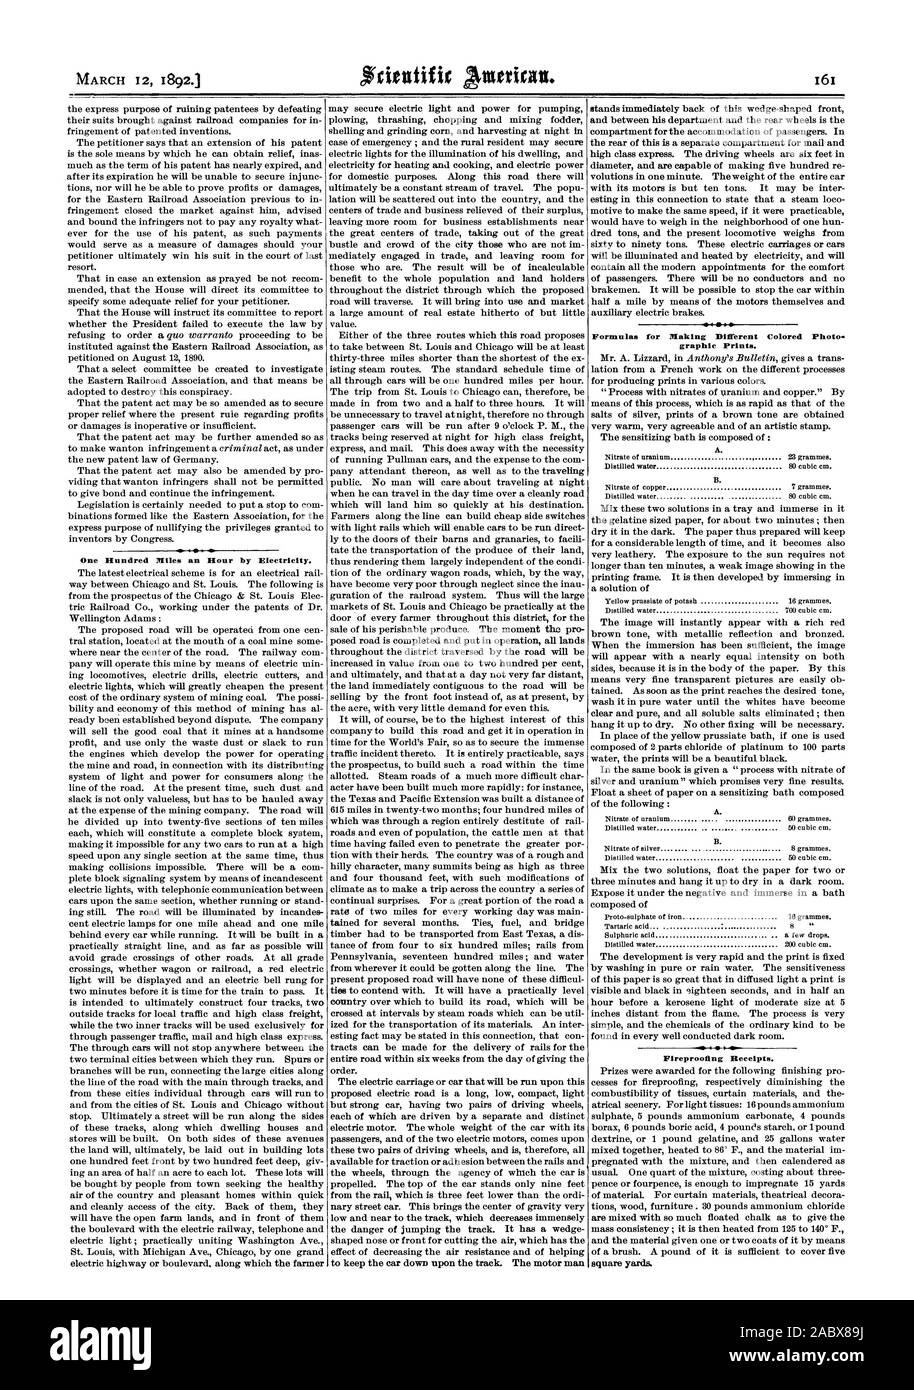 MARCH 12 18921 One Hundred Miles an Hour by Electricity. Formulas for Making Different Colored Photo. graphic Prints.  4  PAI Fireproofing Receipts., scientific american, 92-03-12 Stock Photo